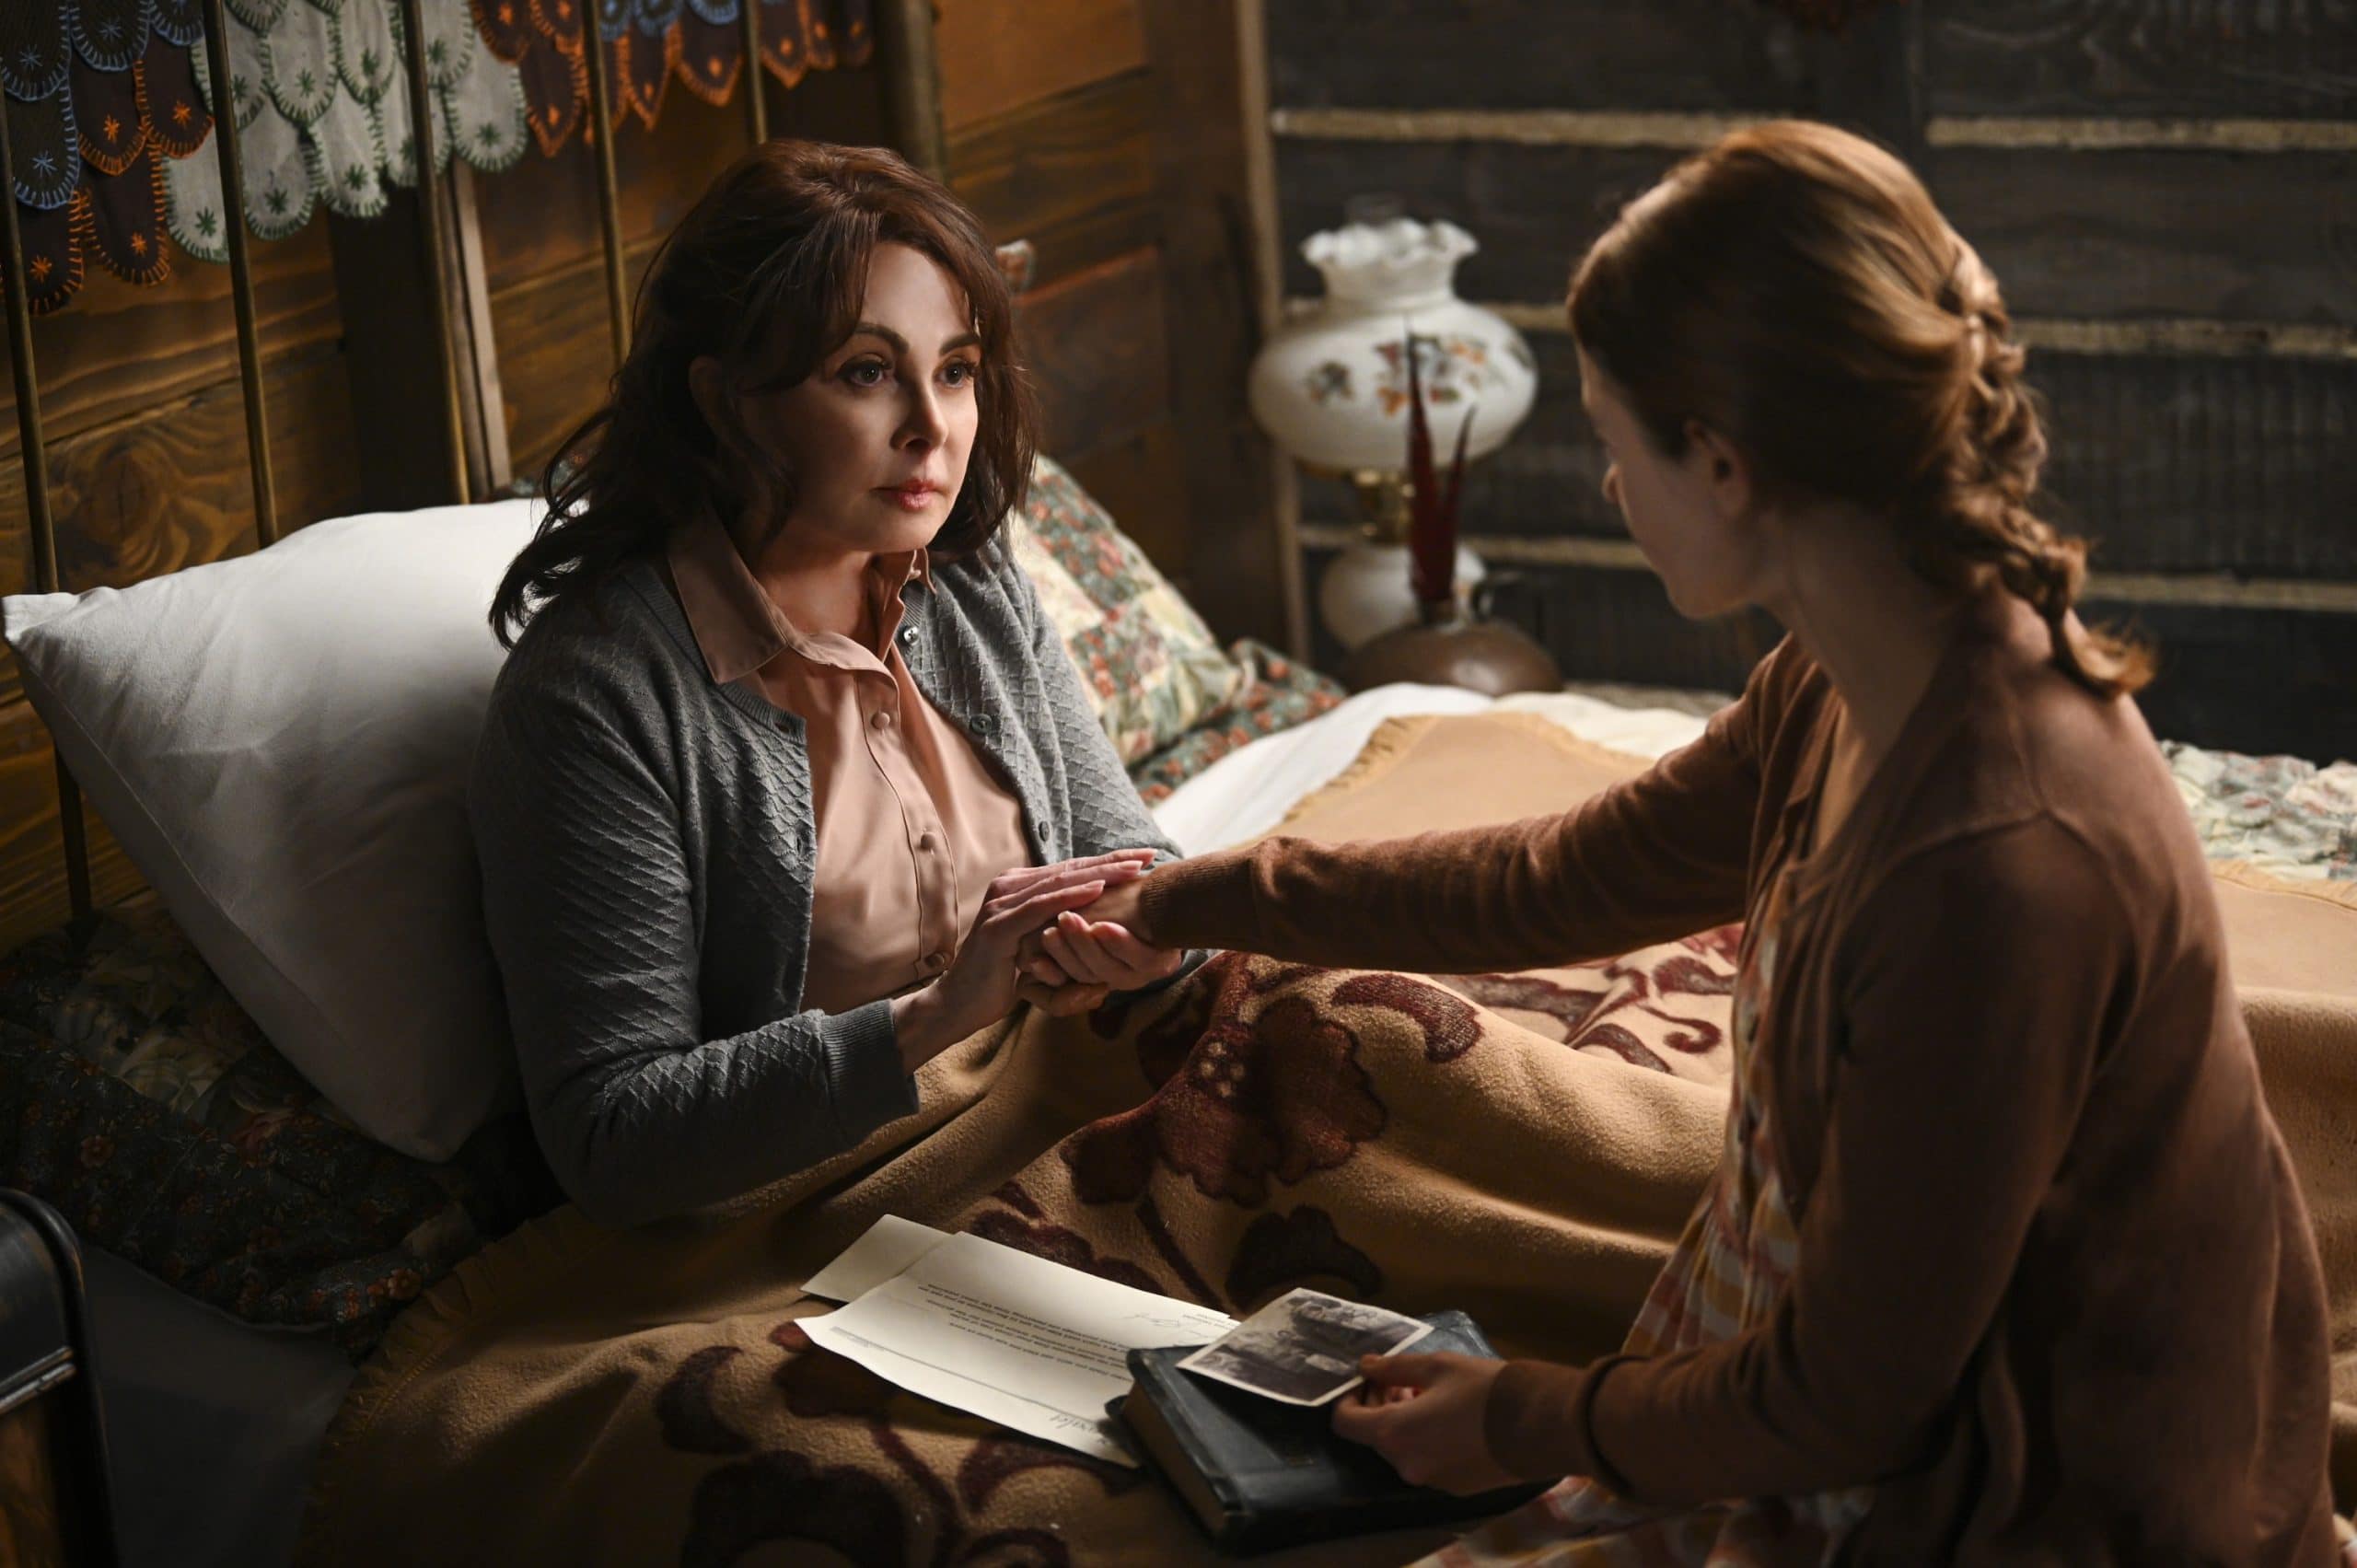 RUBY, (aka V.C. ANDREWS' RUBY), right: Naomi Judd, (aired March 20, 2021)